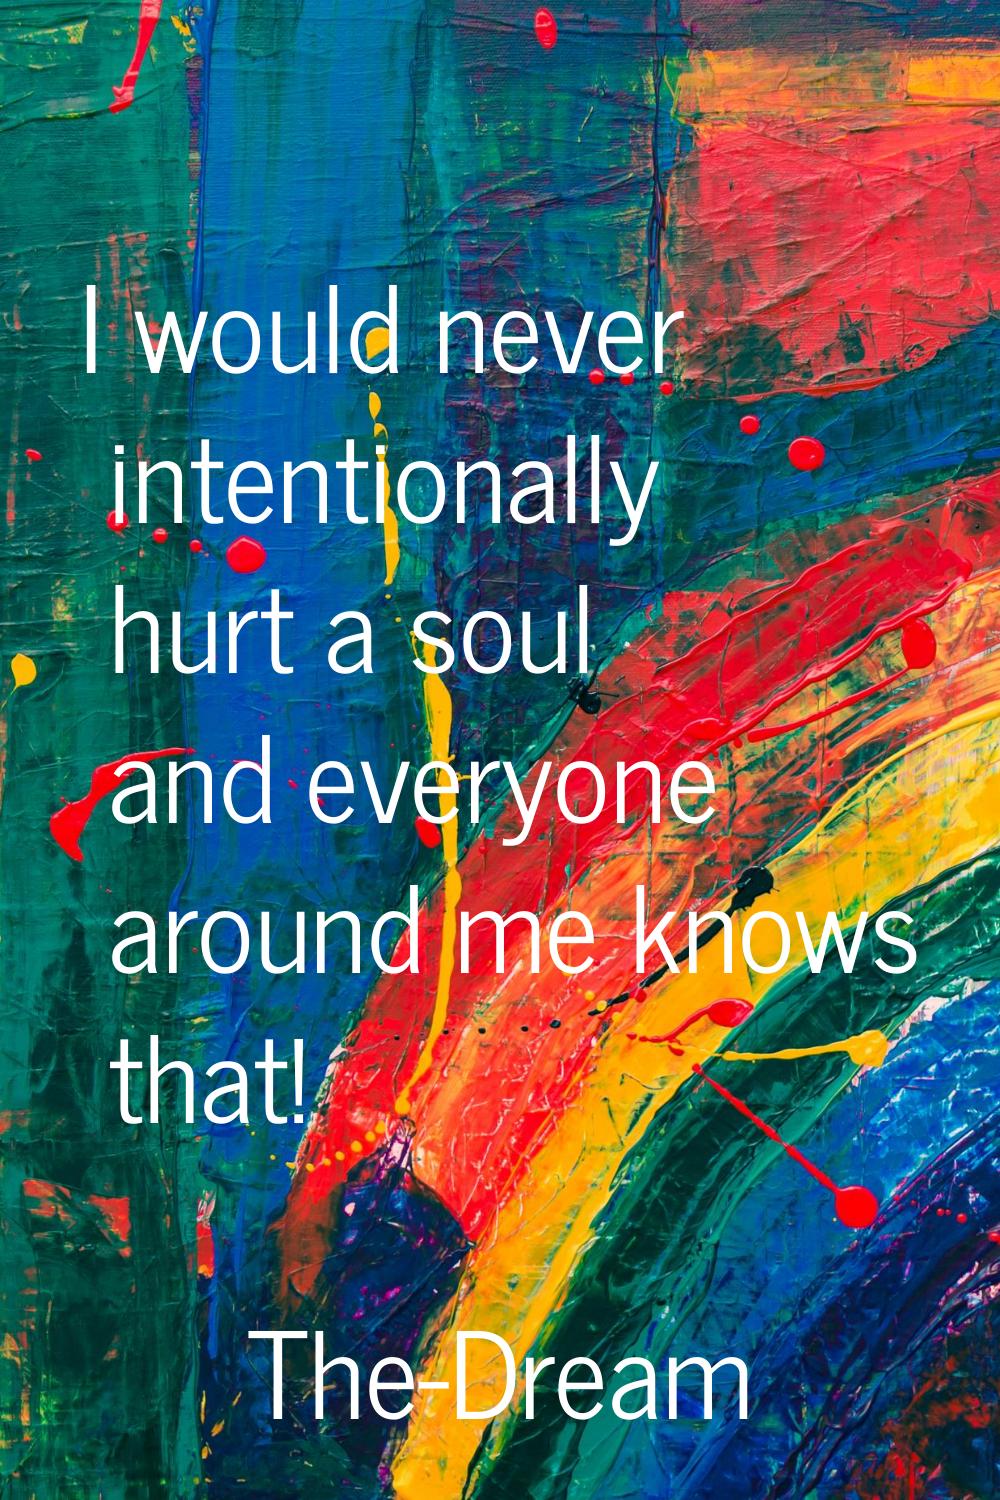 I would never intentionally hurt a soul and everyone around me knows that!